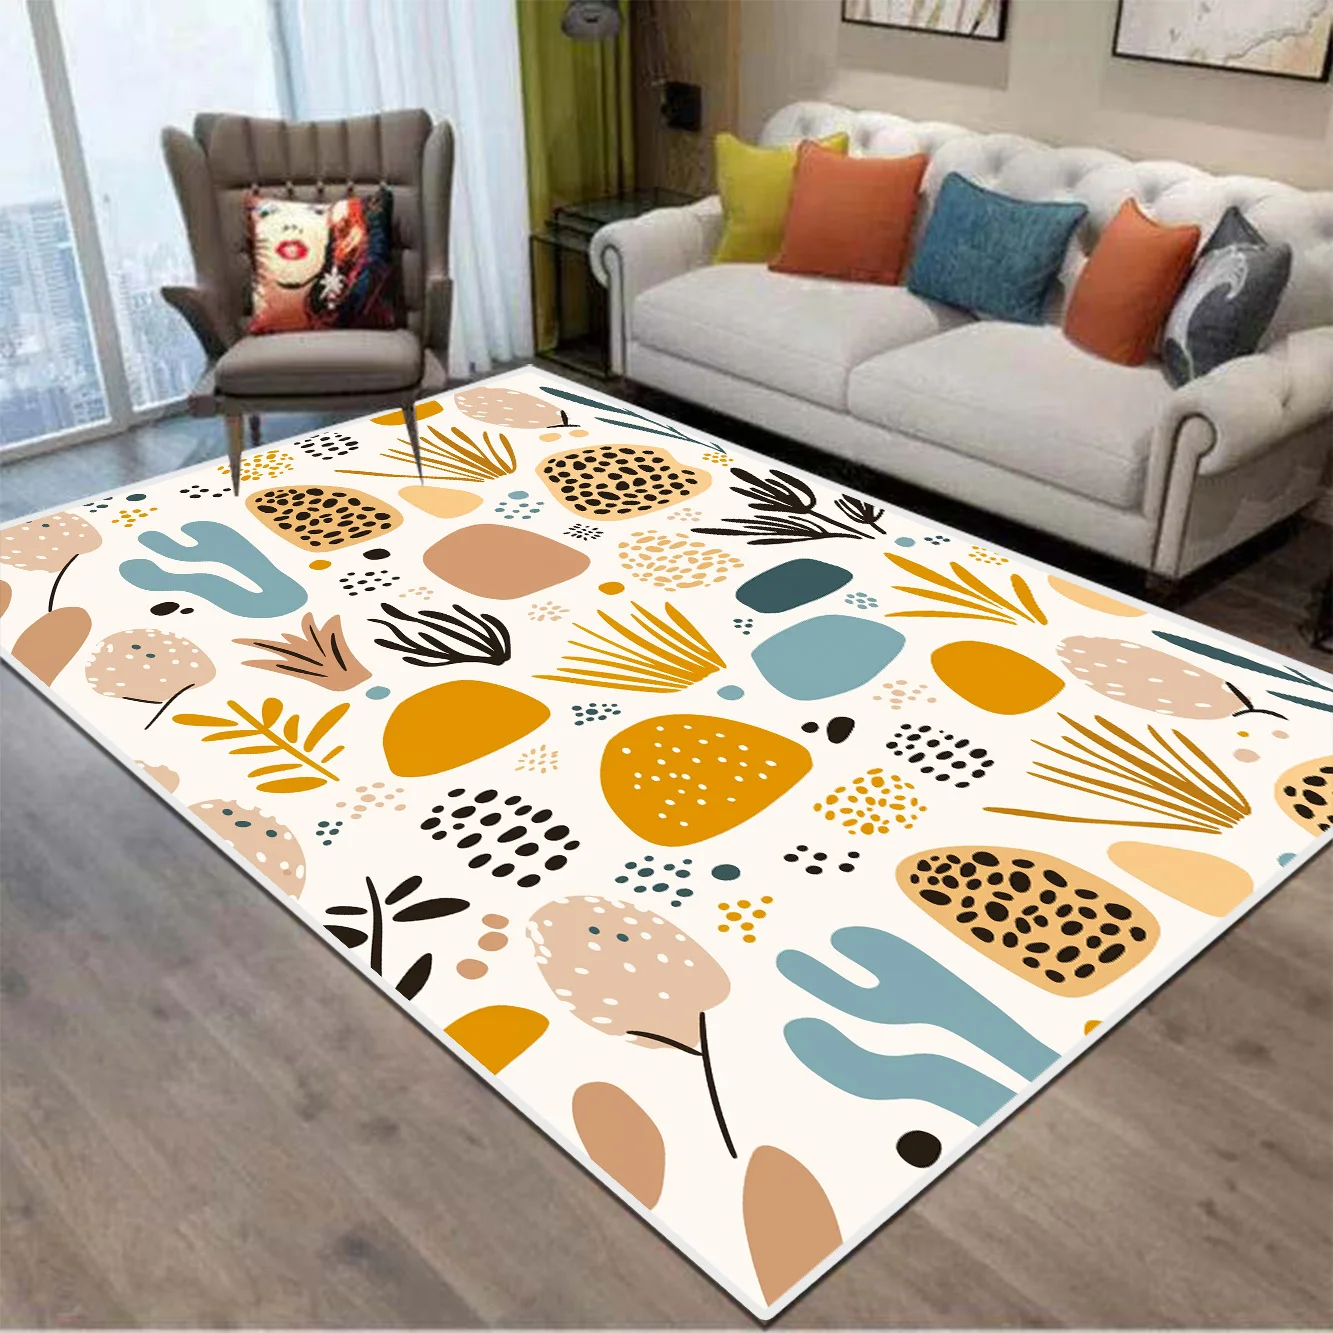 

Modern Geometry Carpets Living Room Large Area Bedroom Decor Abstract Soft Fluffy Carpet Home Floor Mat Anti-slip Cloakroom Rugs